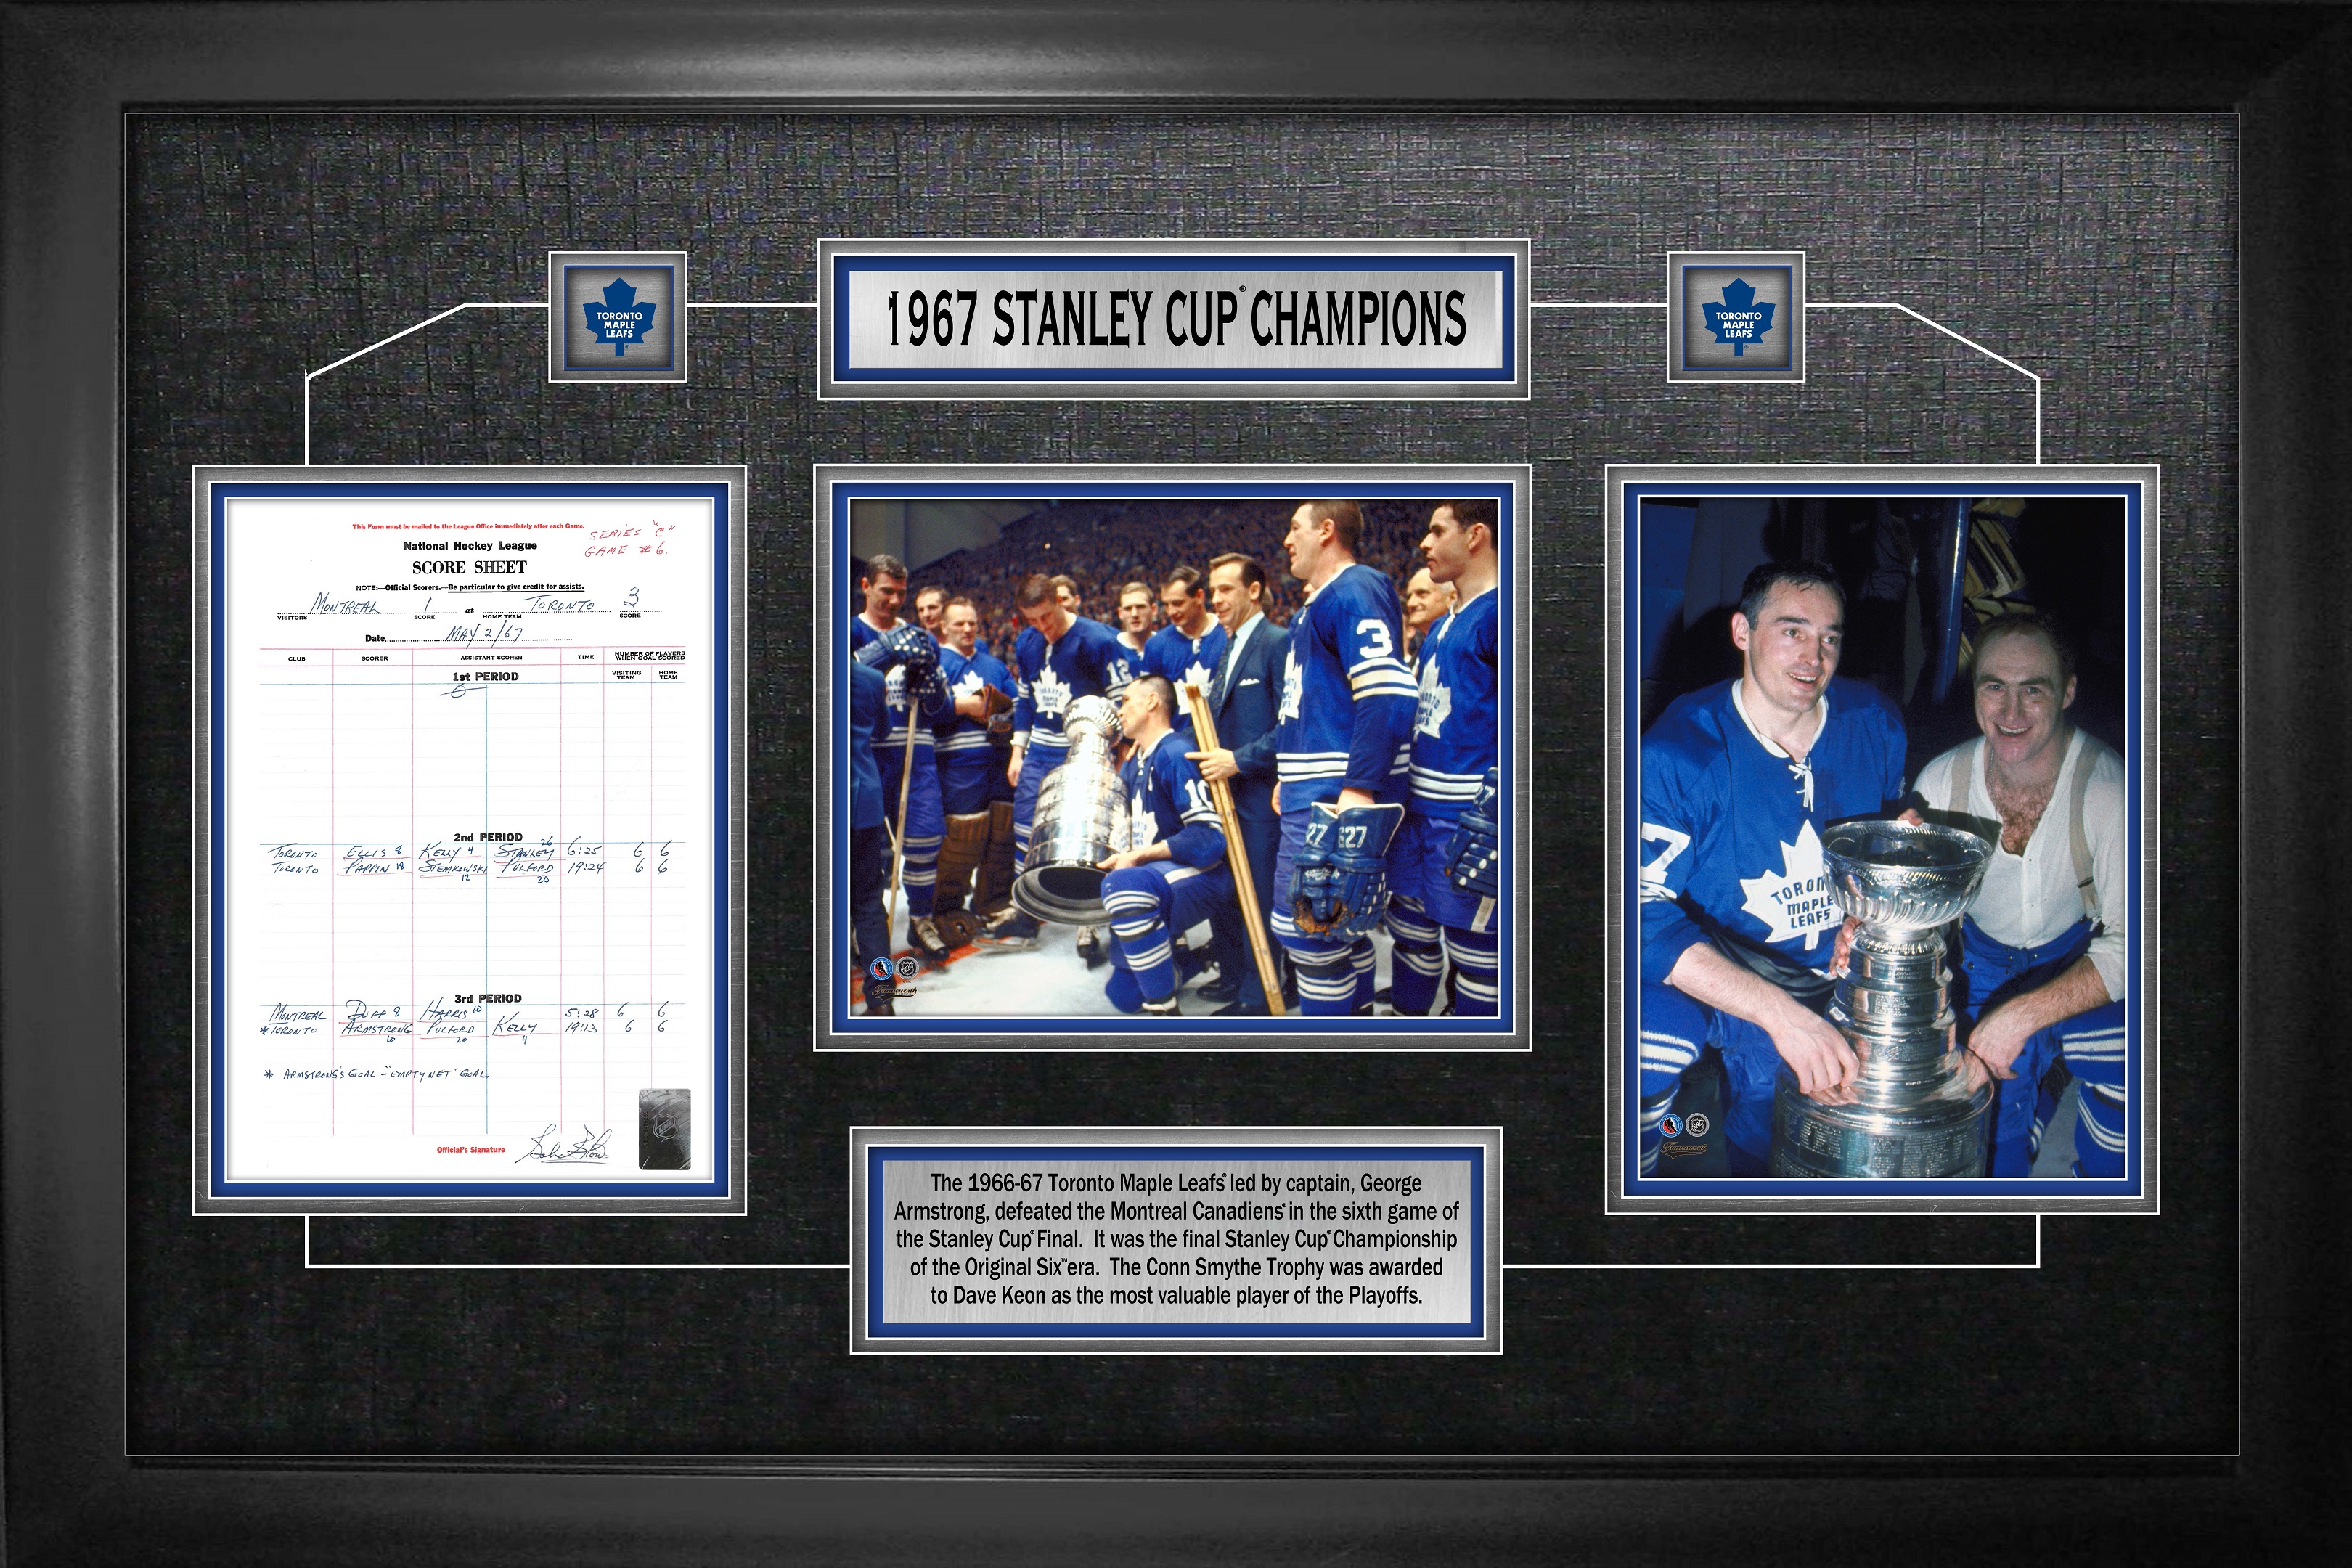 https://www.sportcollectibles.ca/wp-content/uploads/2019/09/Leafs-67-Cup-Score-Sheet-Frame.jpg